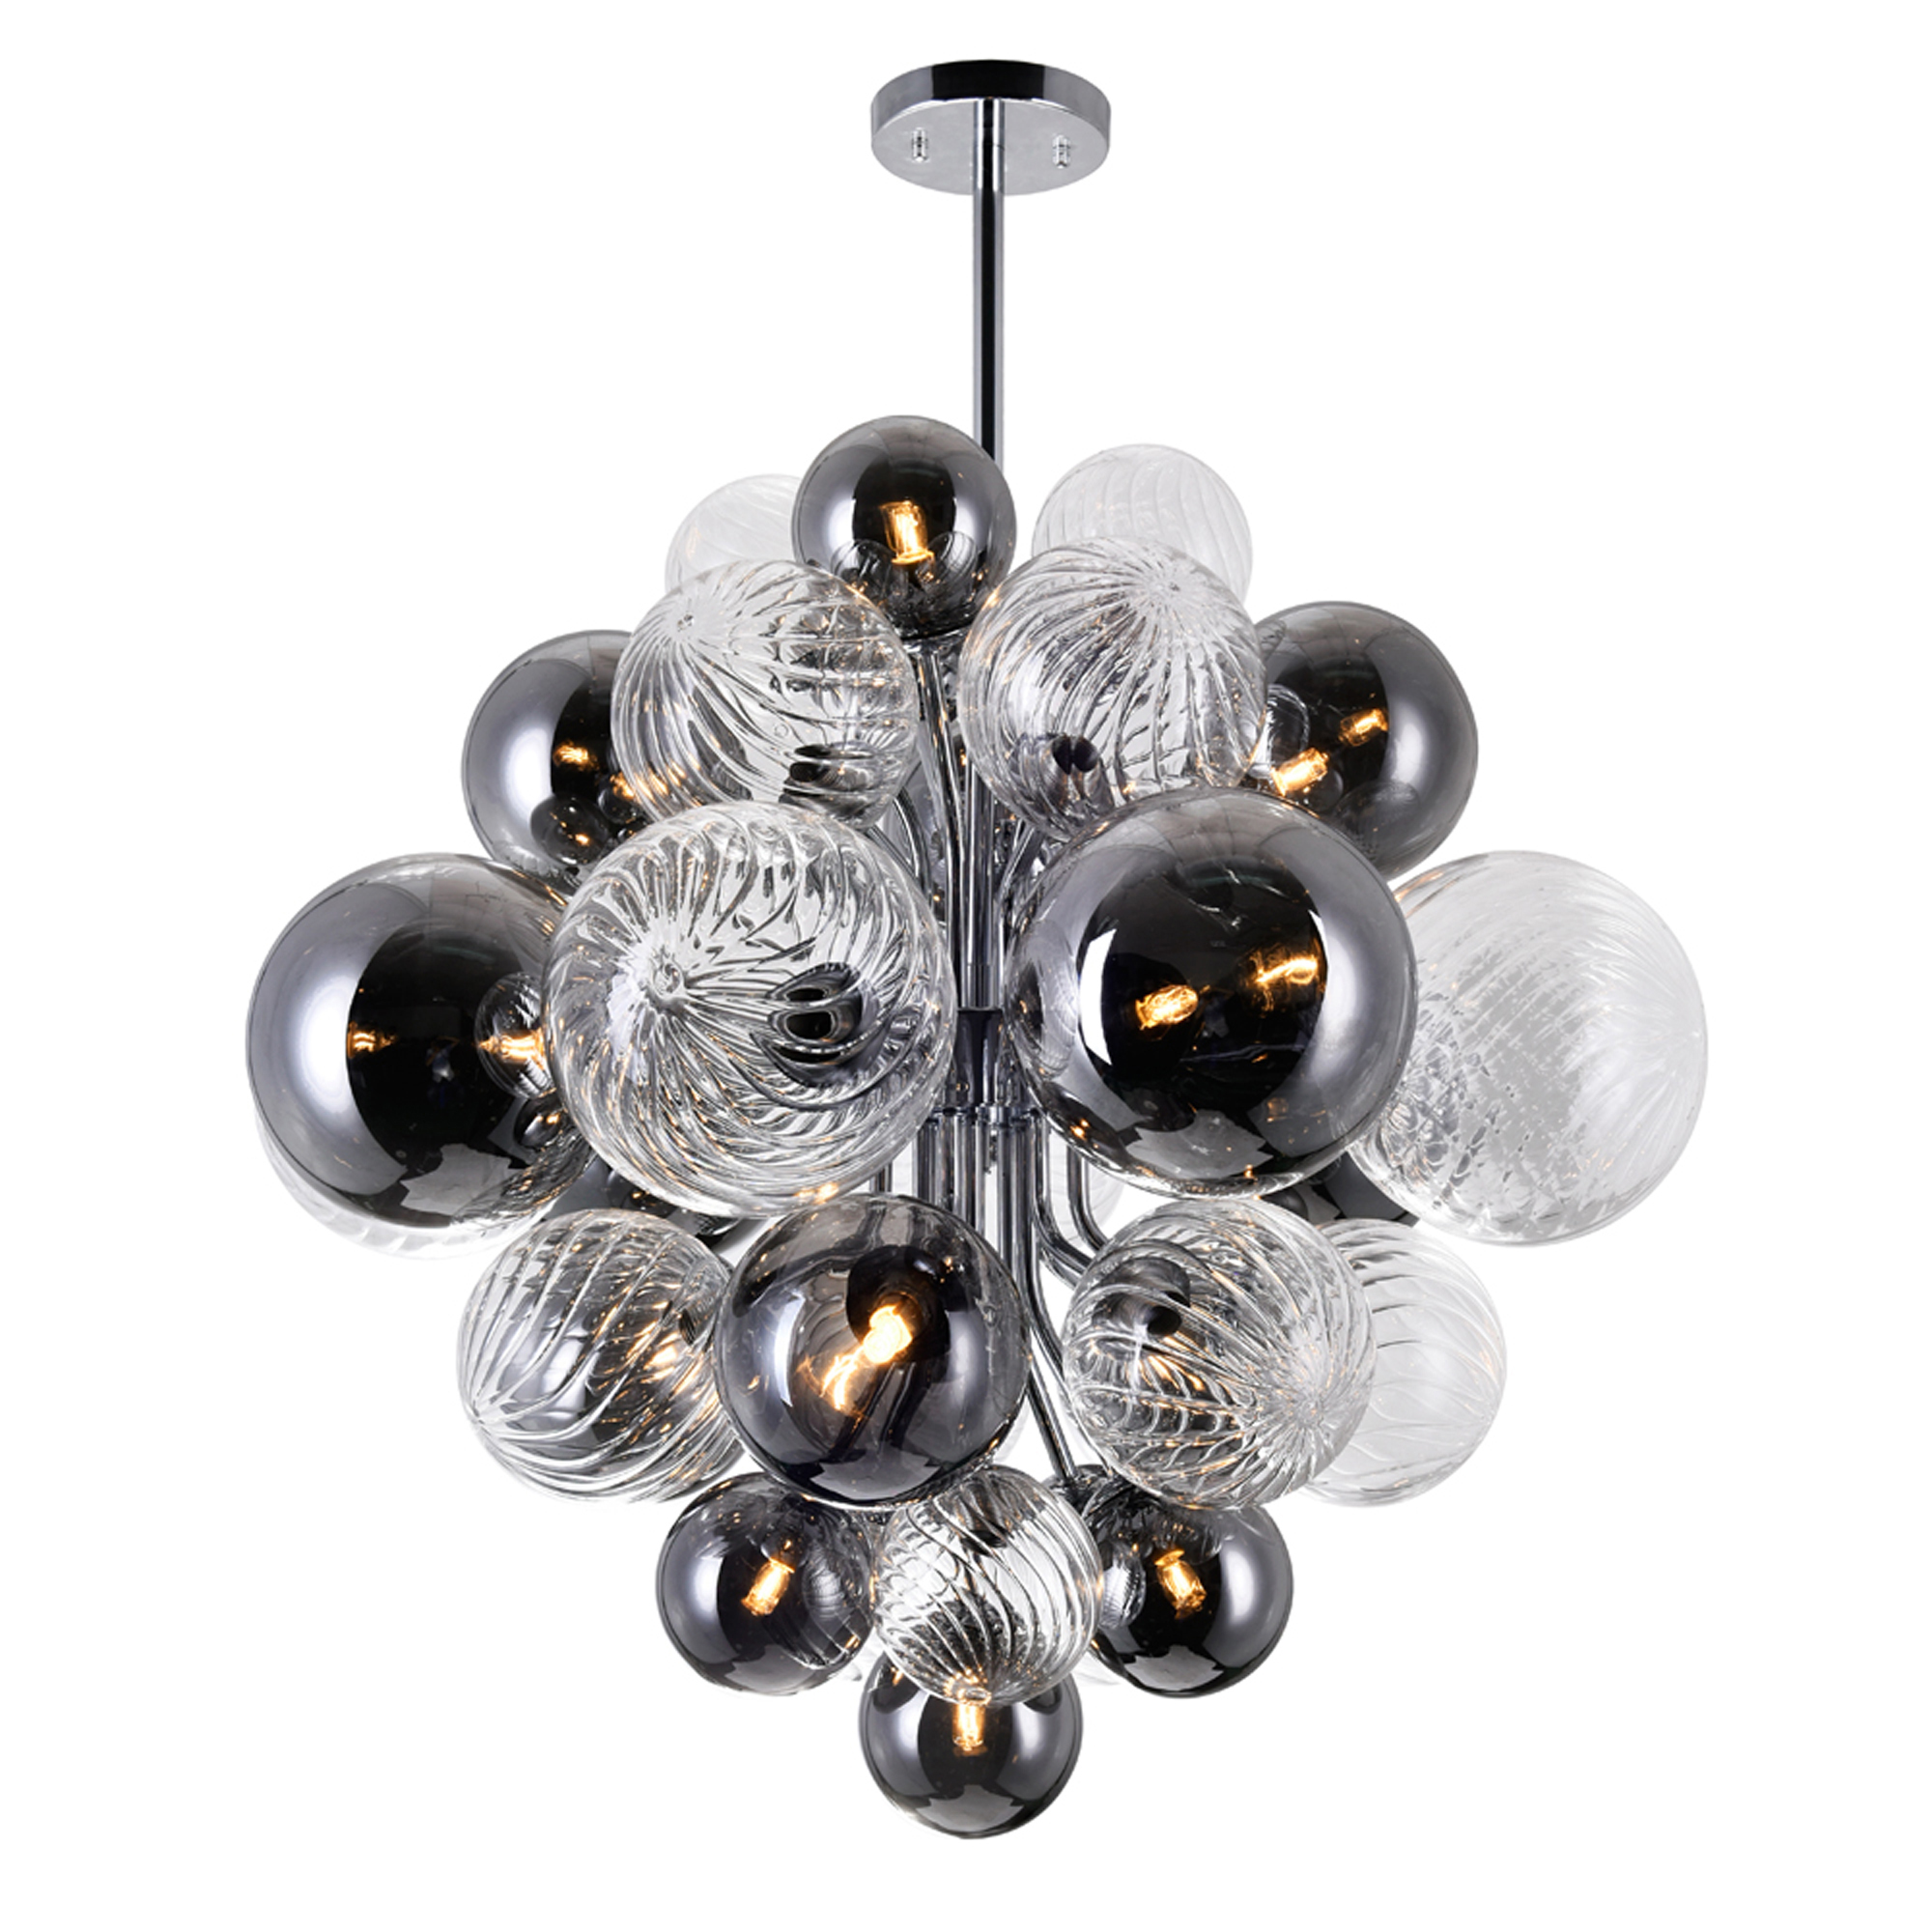 Pallocino 15 Light Chandelier With Chrome Finish